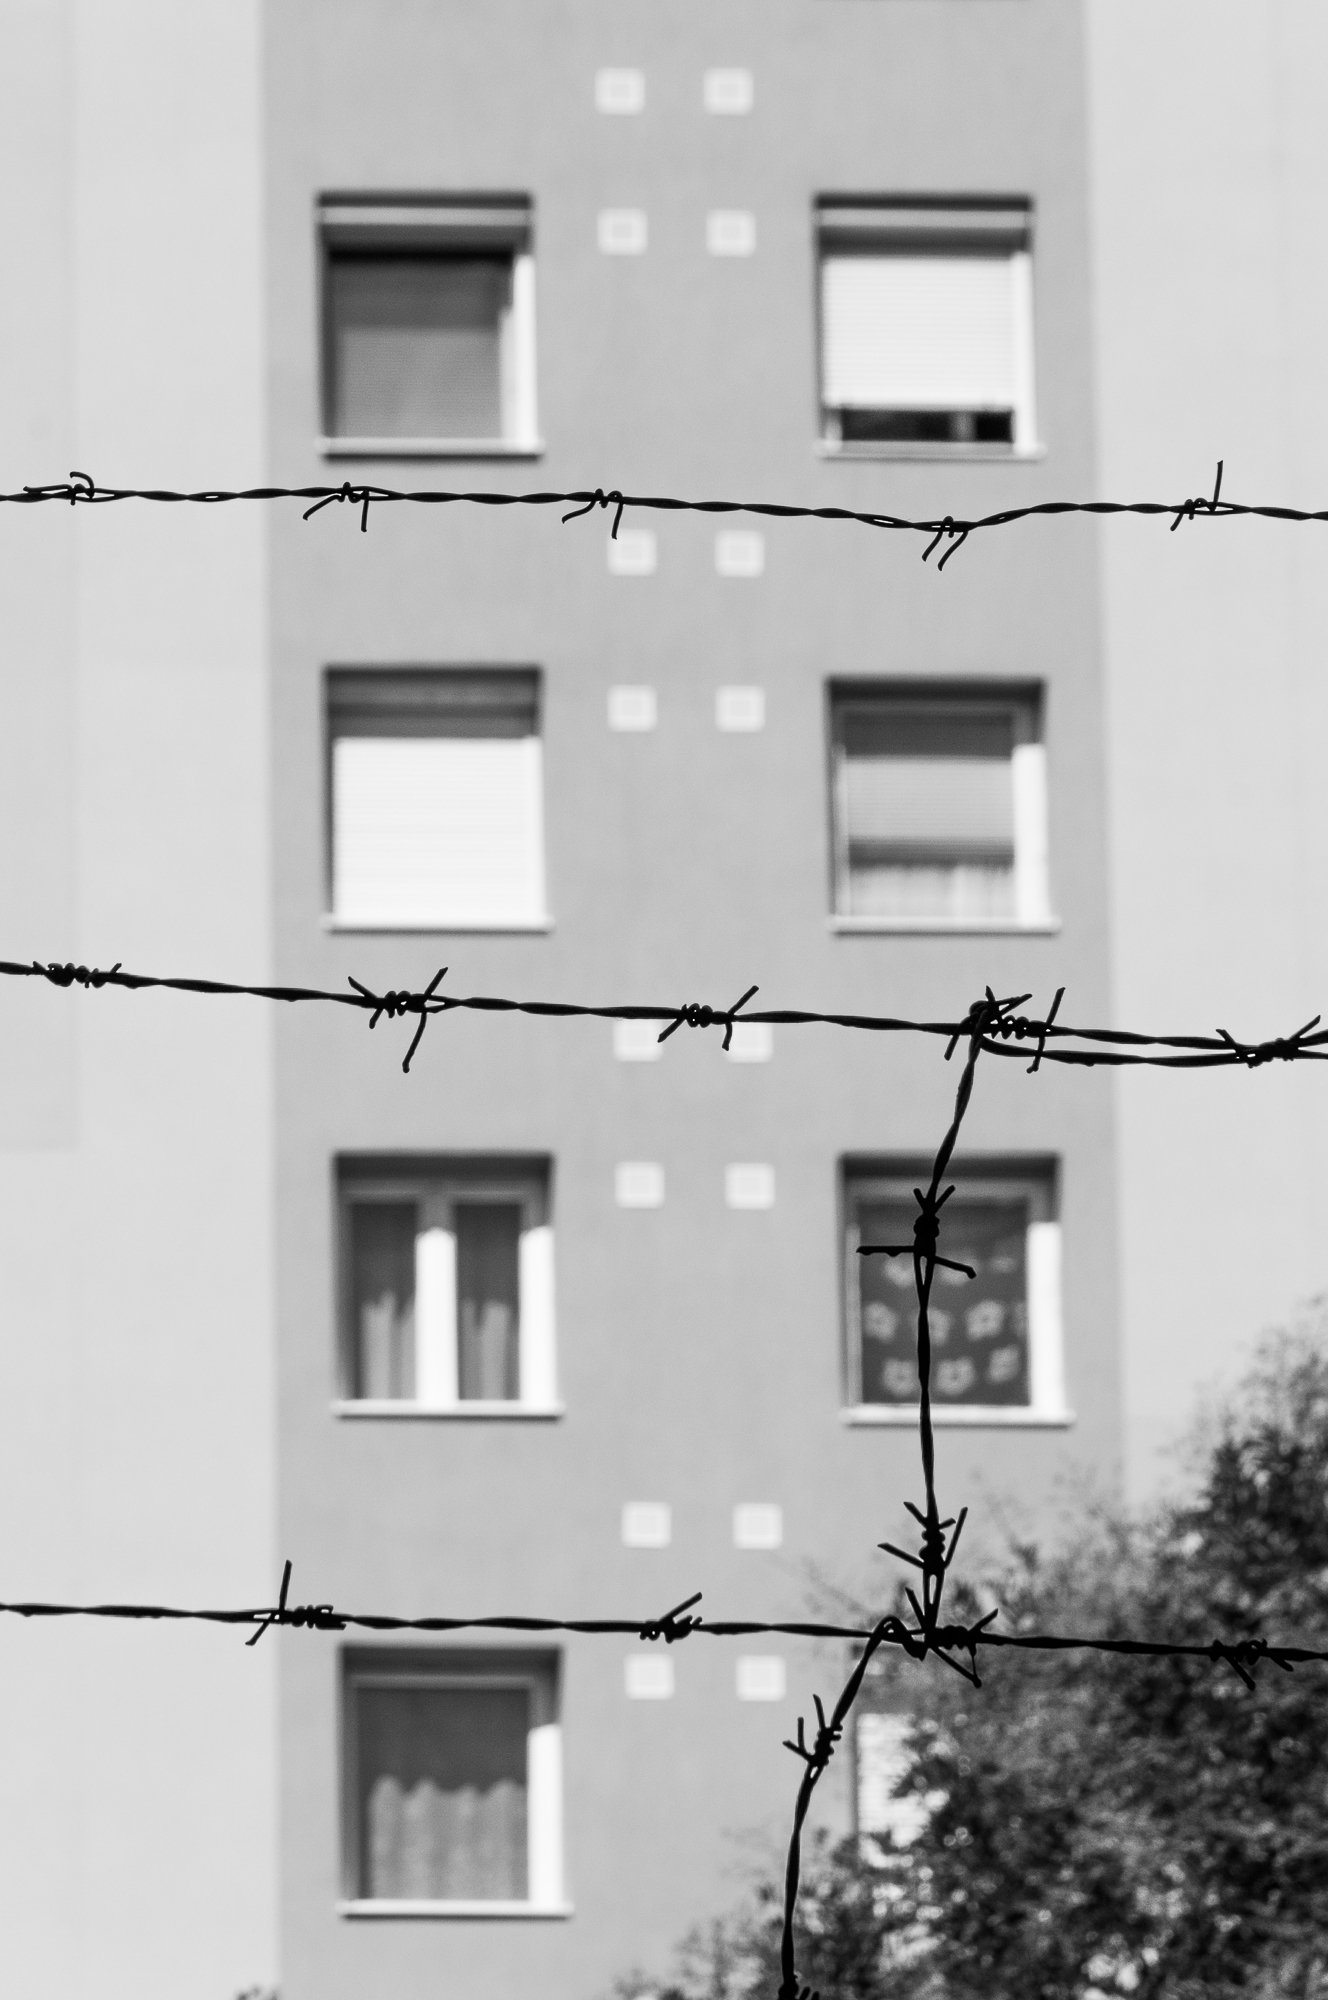 Adam Mazek Photography Budapest 2017. Perspective. Barbed wire. Perspective, part II.